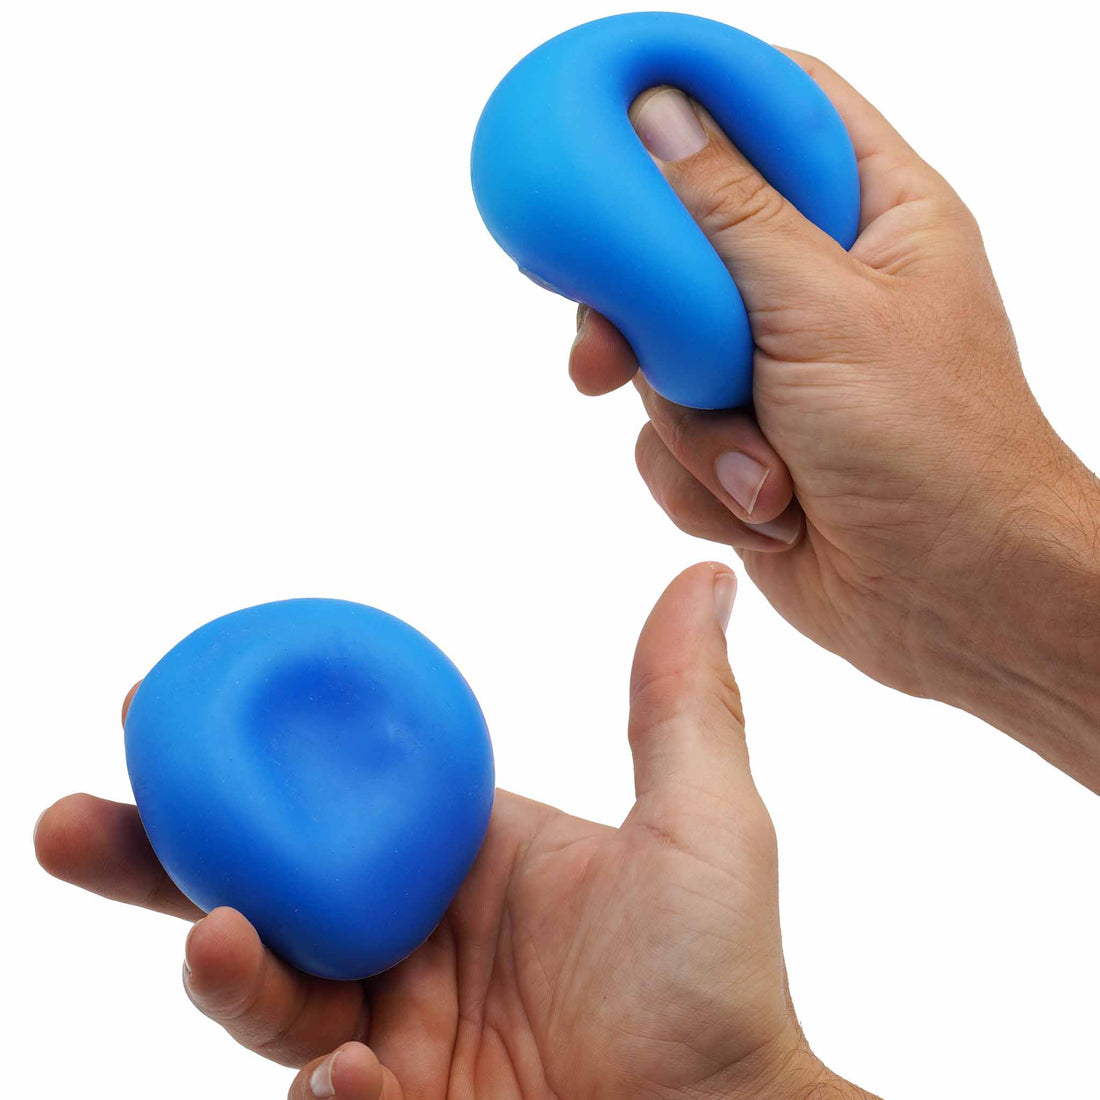 picture of 2 hand with both holding a blue sensory squishy ball. One ball is being squished and the other one was squished and is still deformed. 